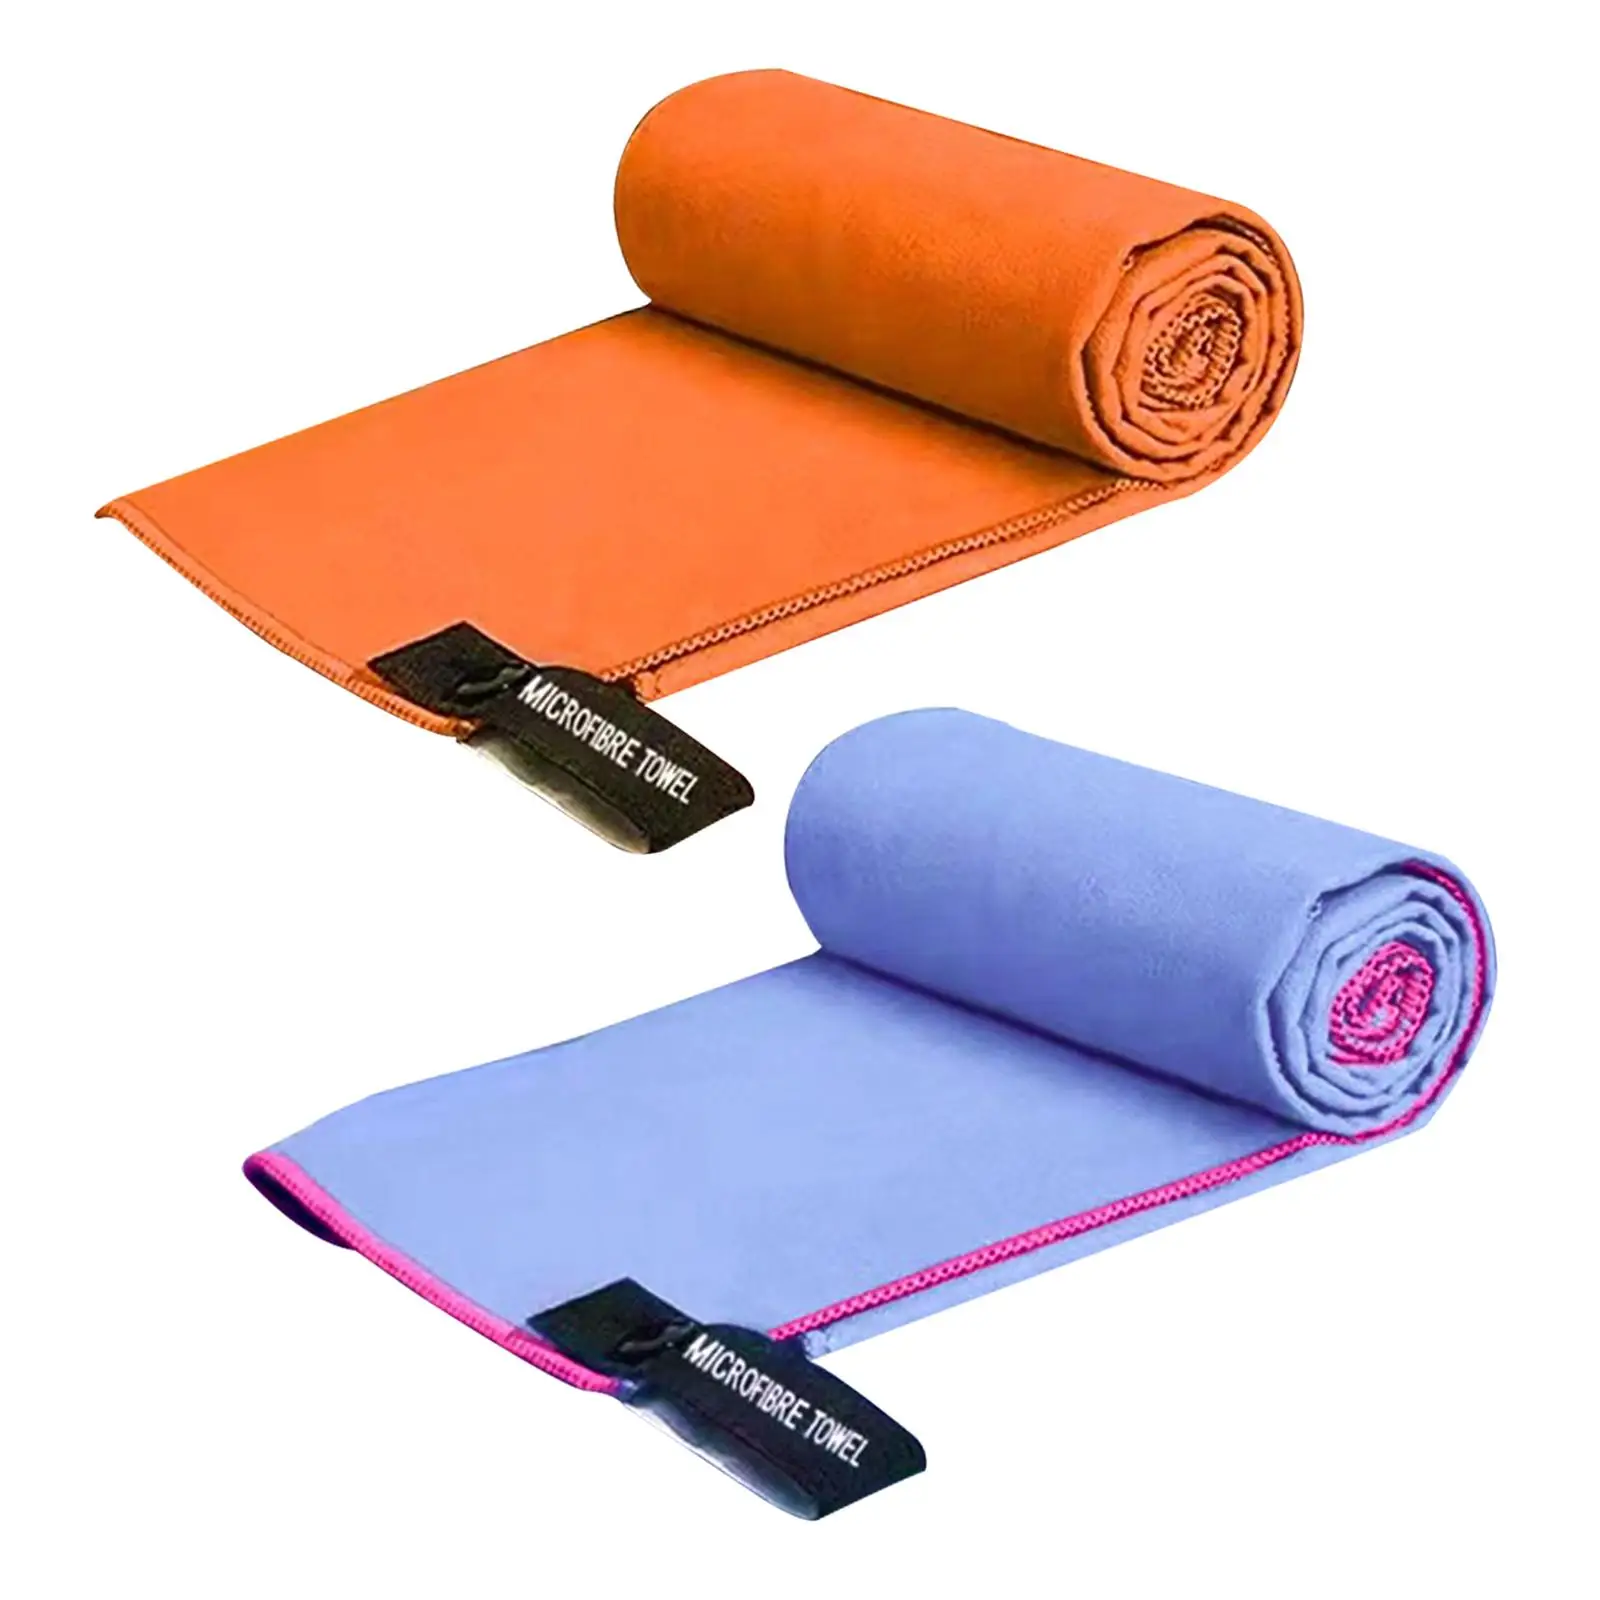 2x Travel Towel Lightweight Household Breathable Portable Soft Super Absorbent Towel for Camp Hand Face Body Swimming Gym